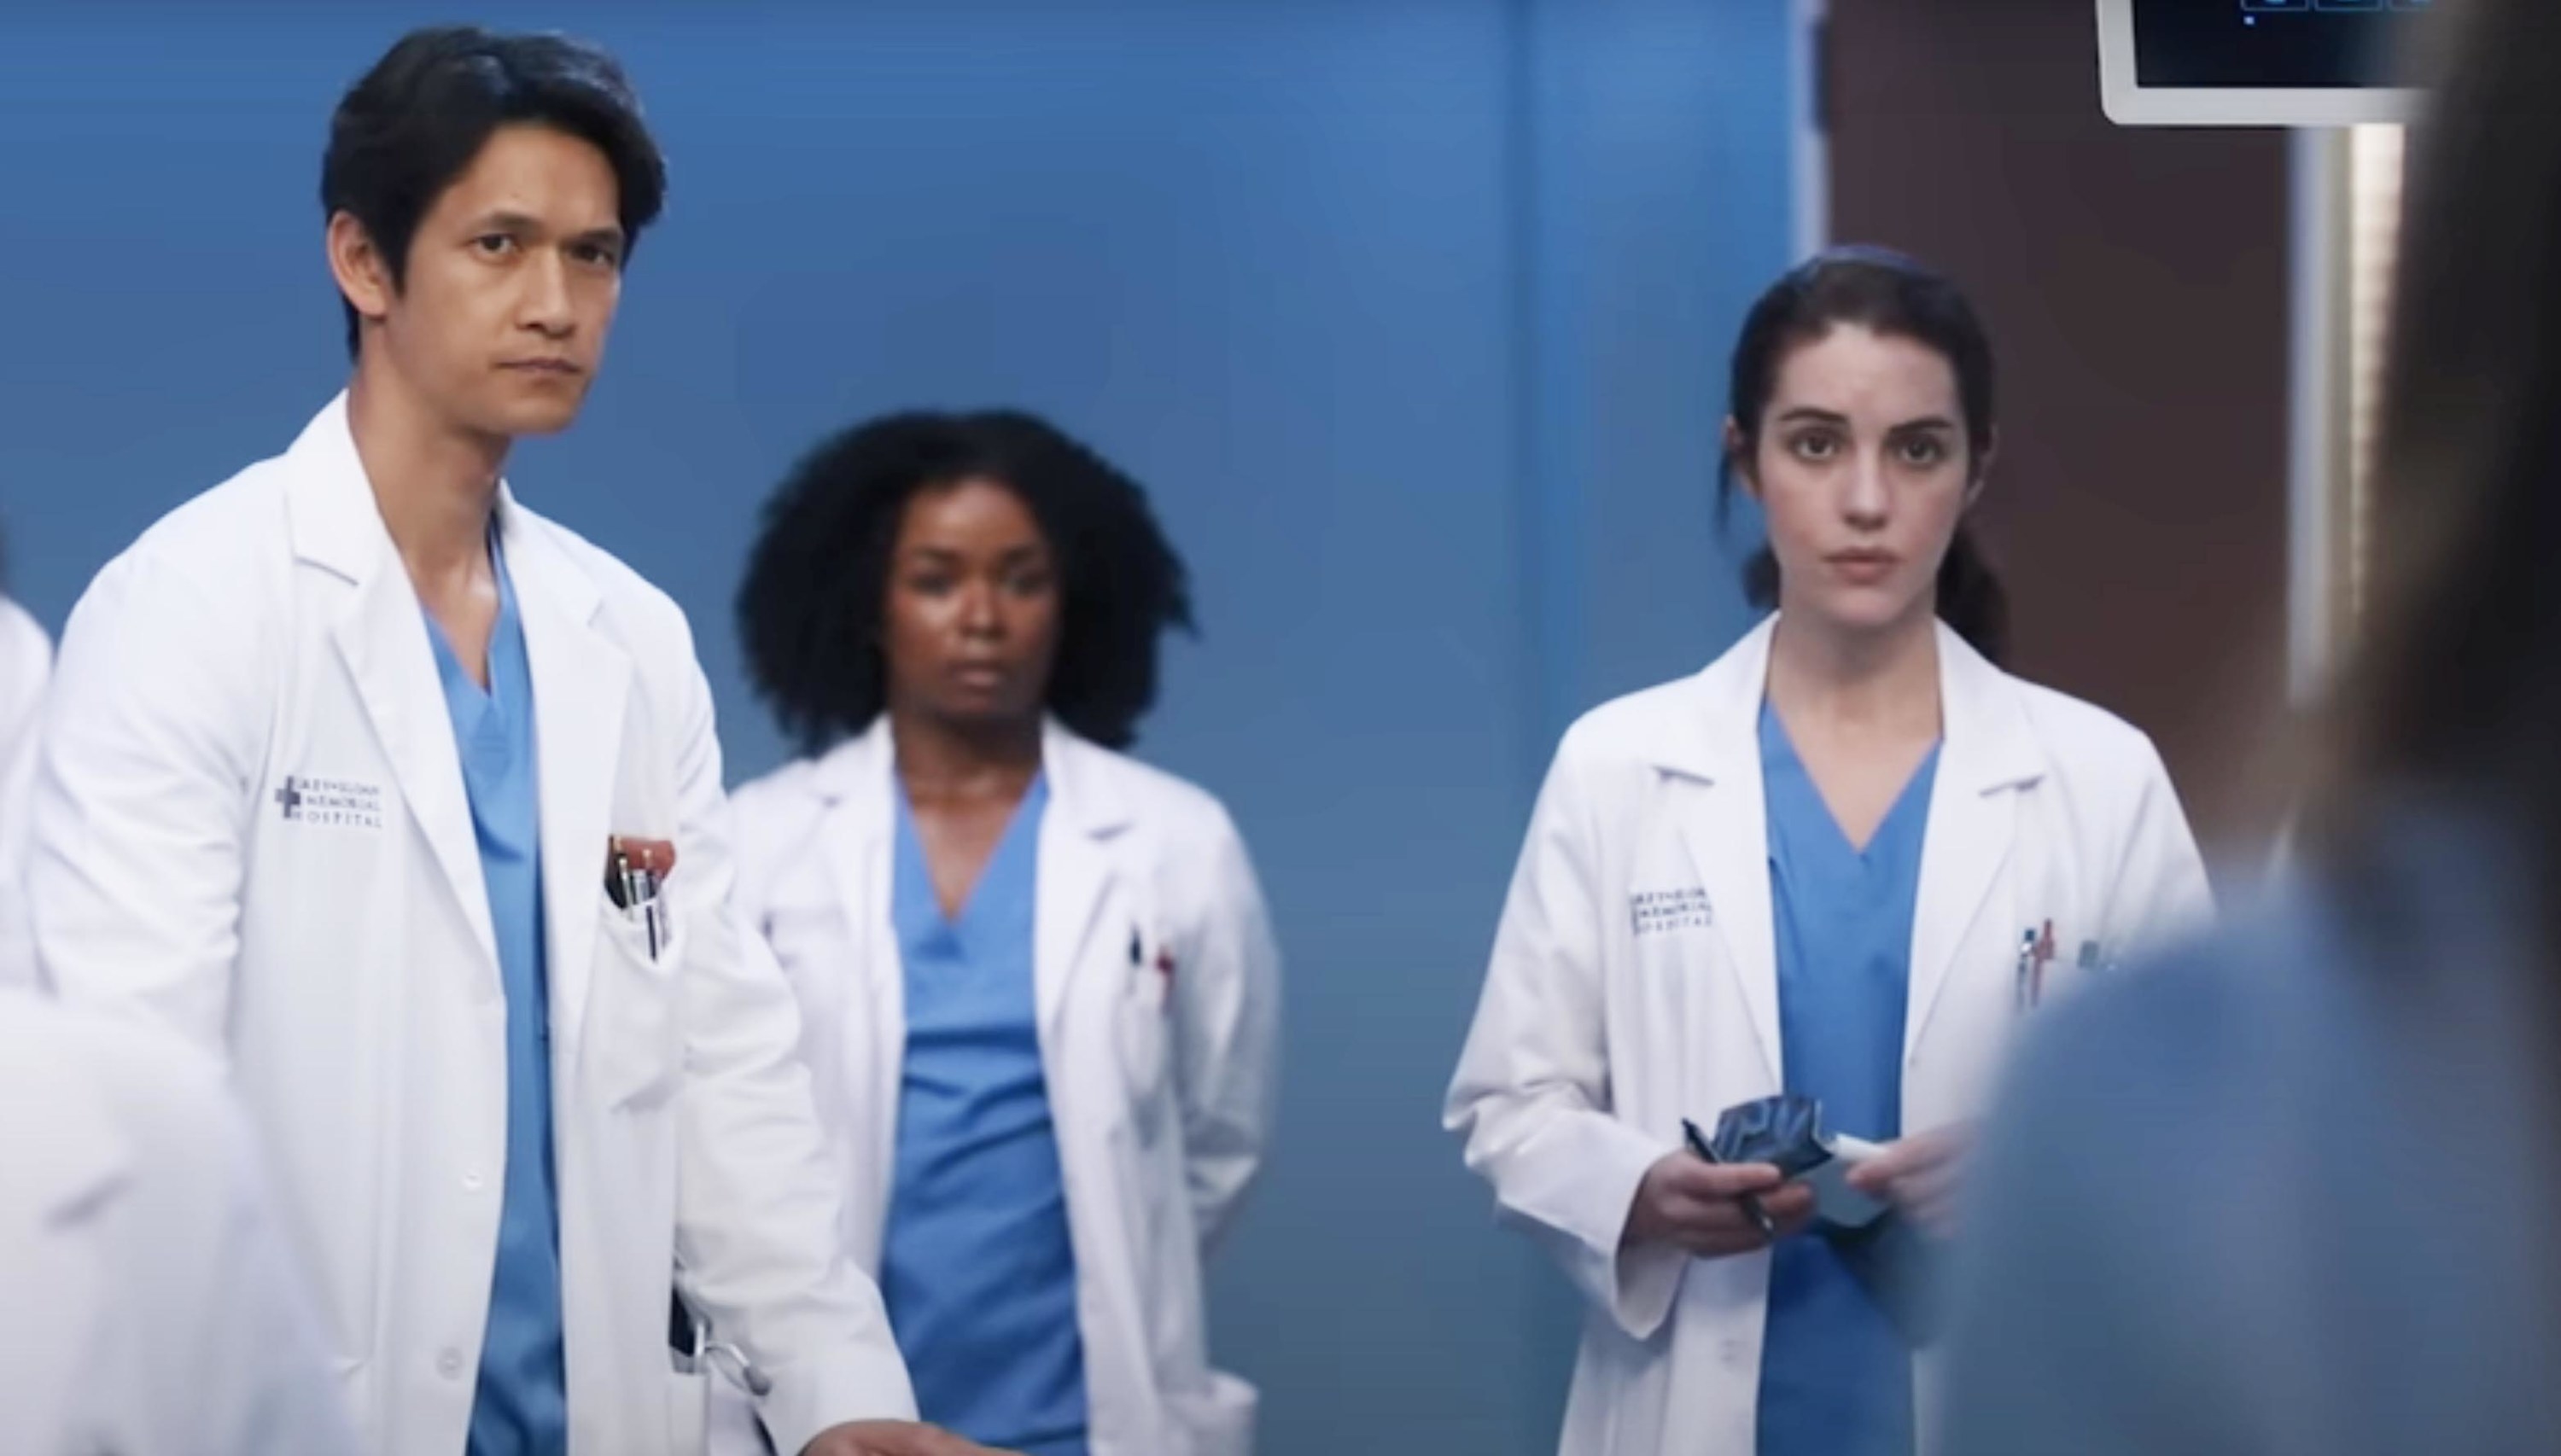 a group of medical professionals looking serious